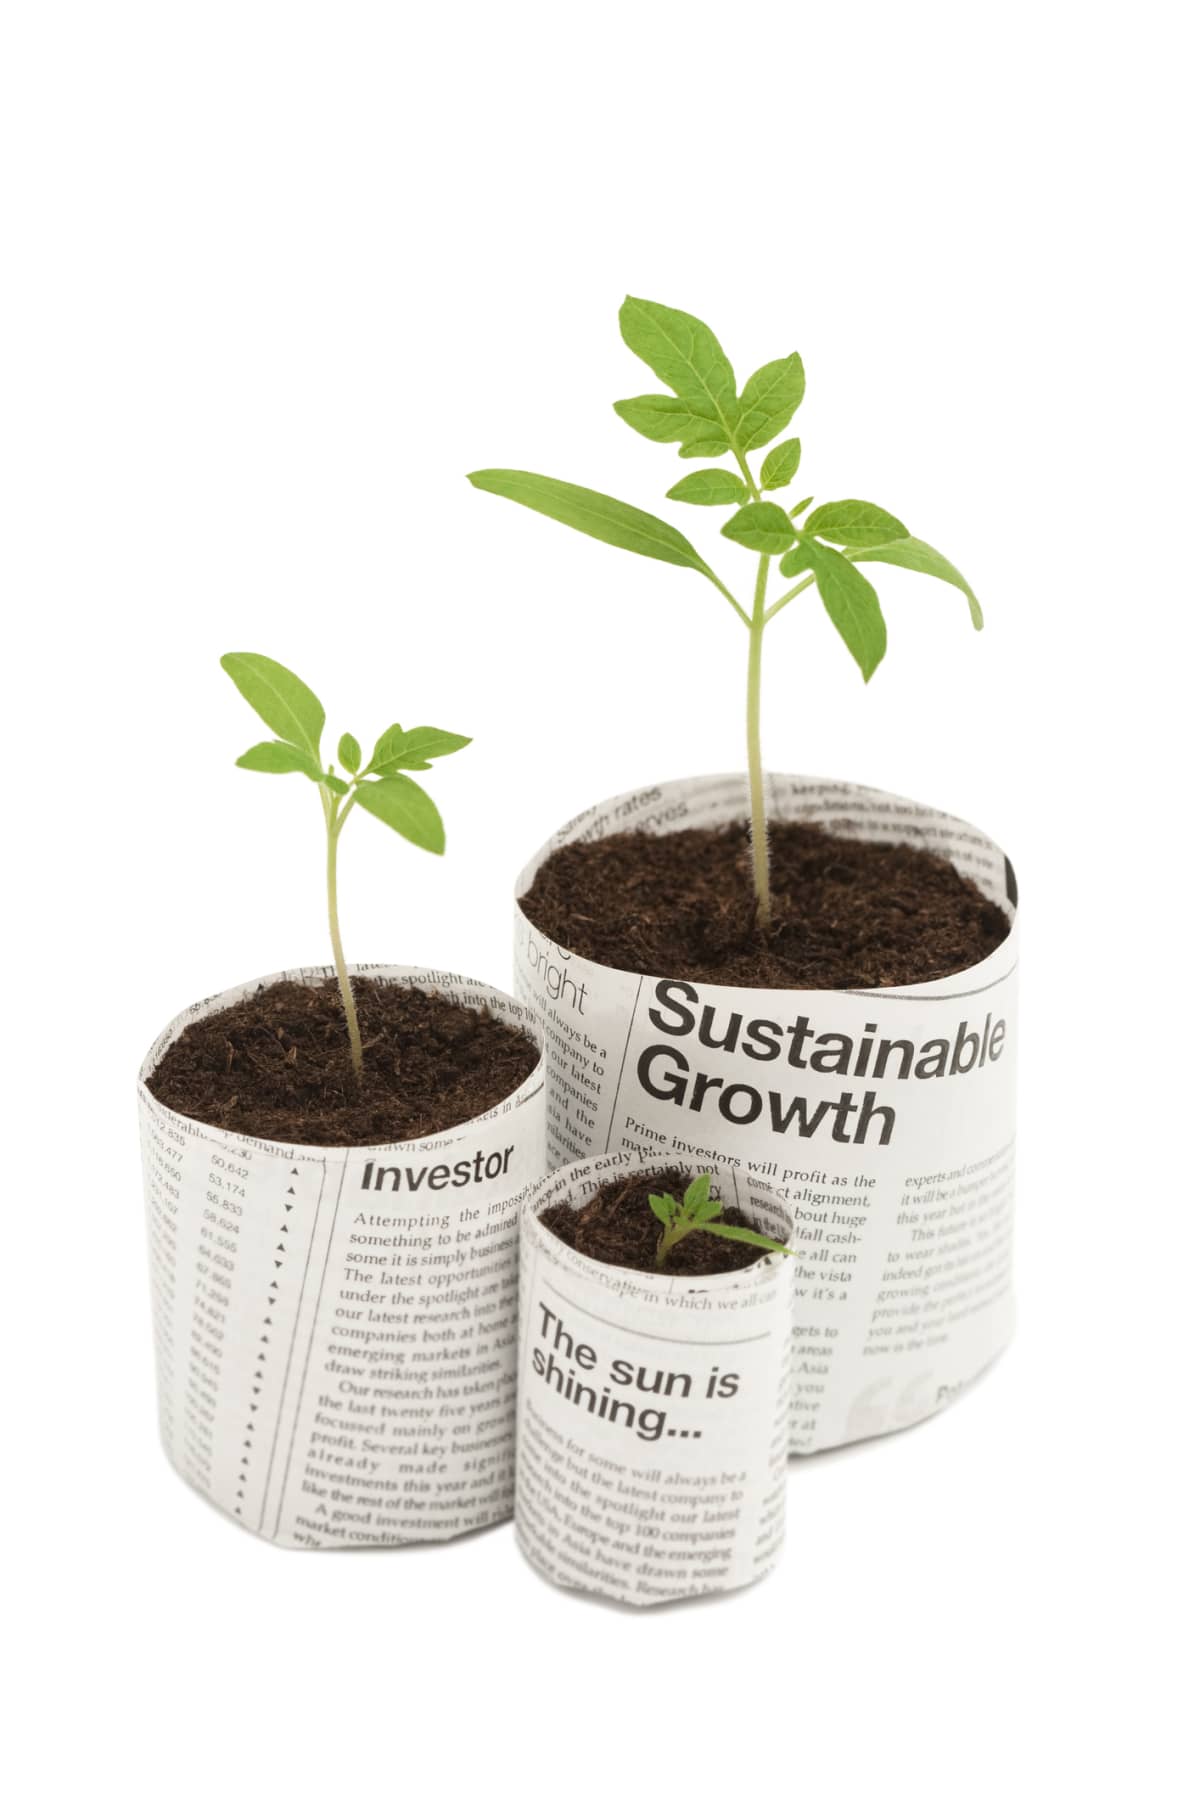 Two seedlings in newspaper plant pots against white background